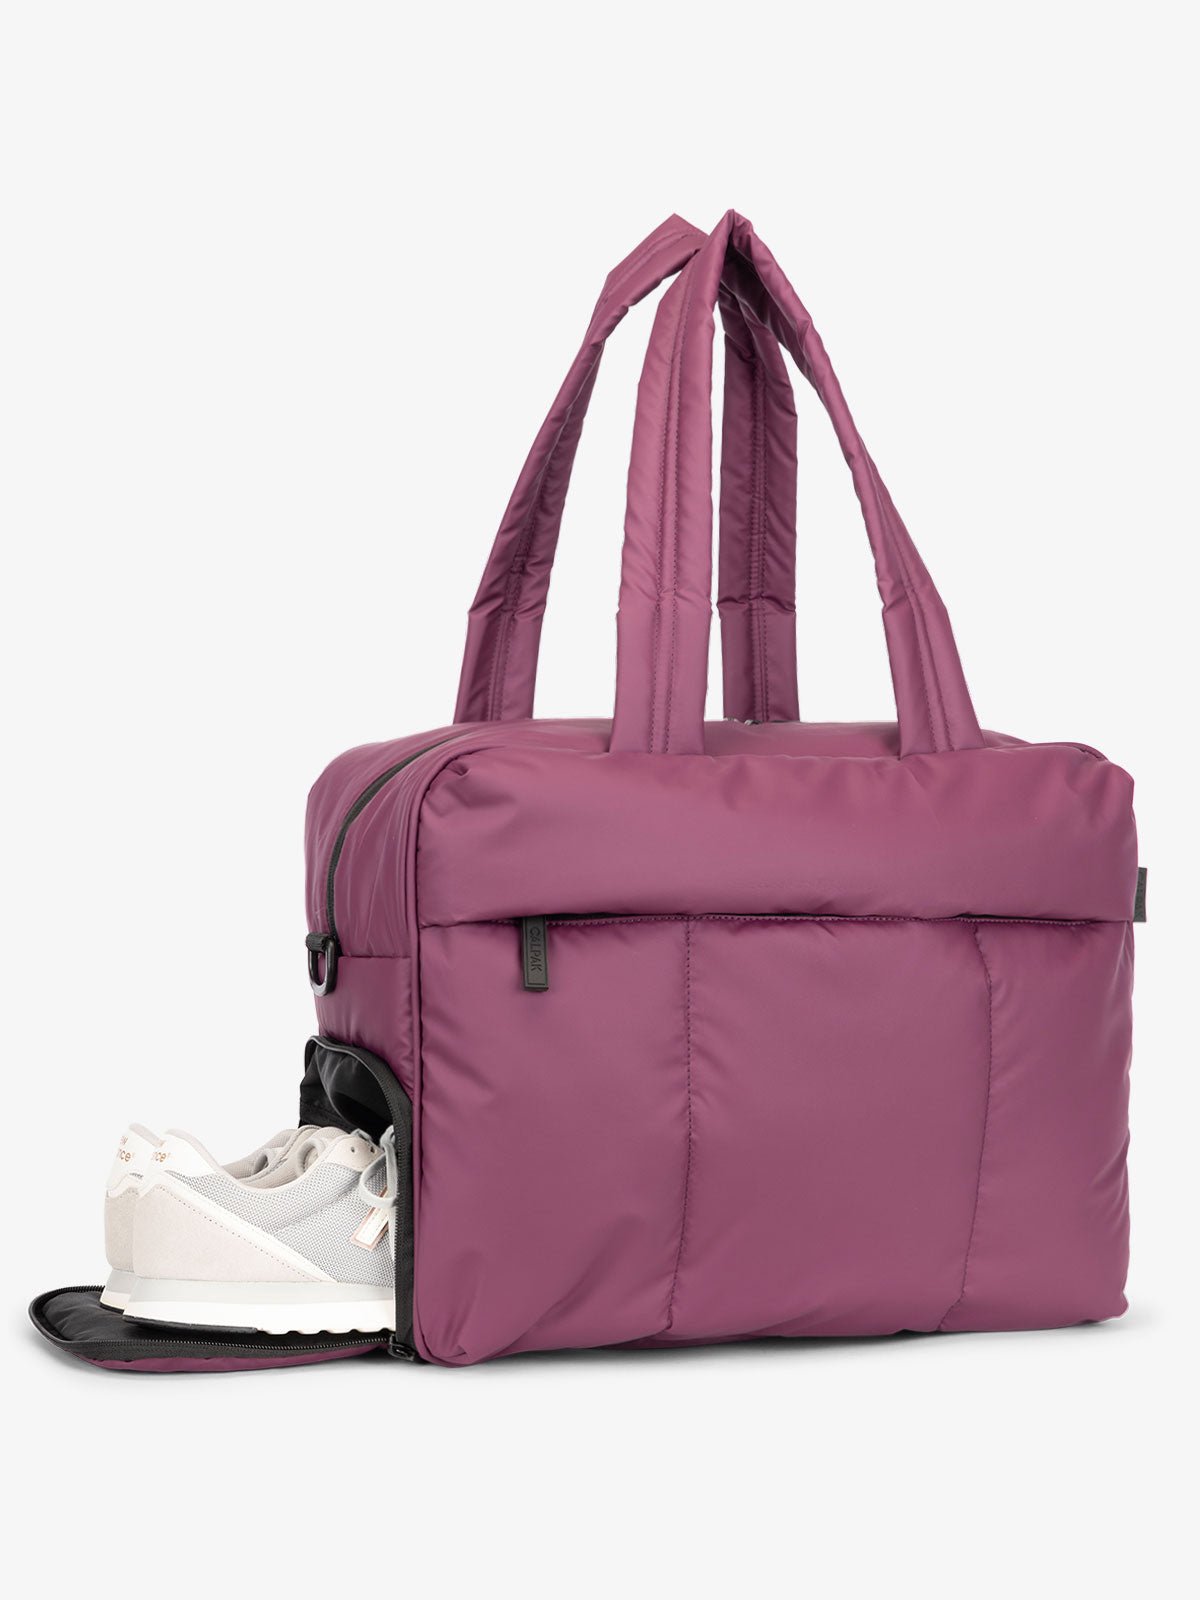 shoe compartment for Luka Duffel Bag in purple plum